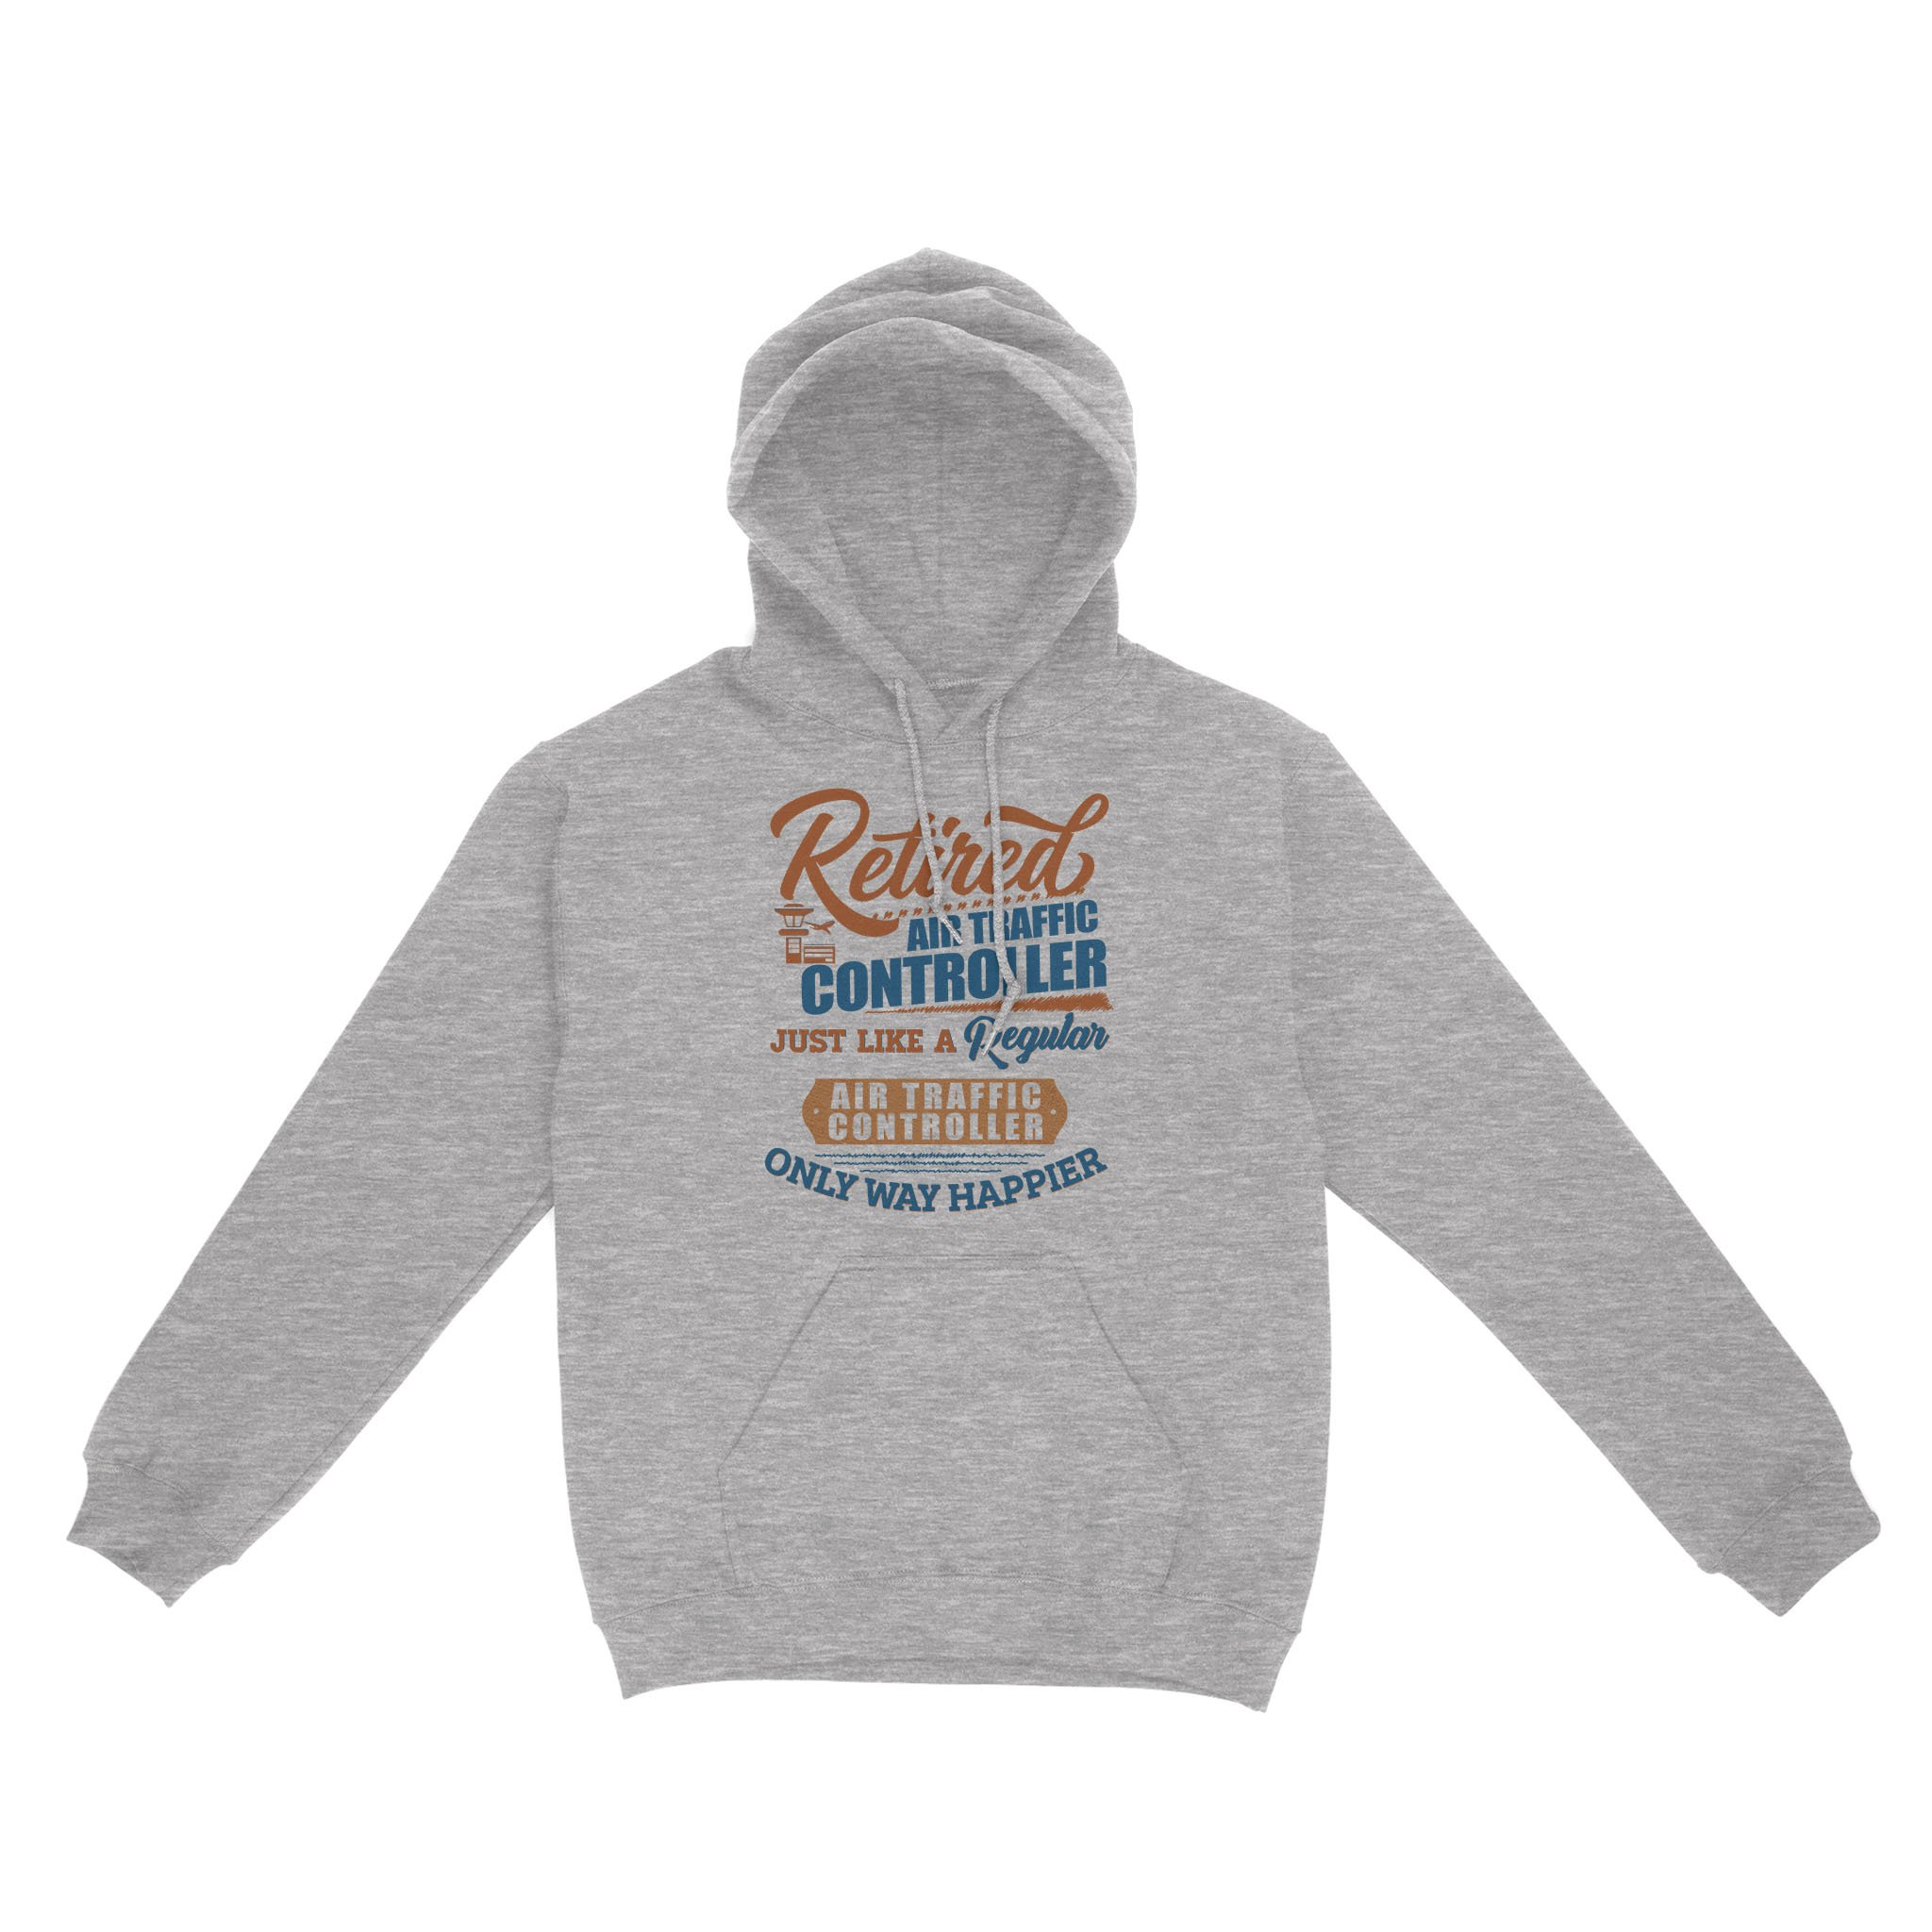 Retired Air Trafic Controller Just Like A Regular Air Traffic Controller Only Way Happier 1 – Standard Hoodie